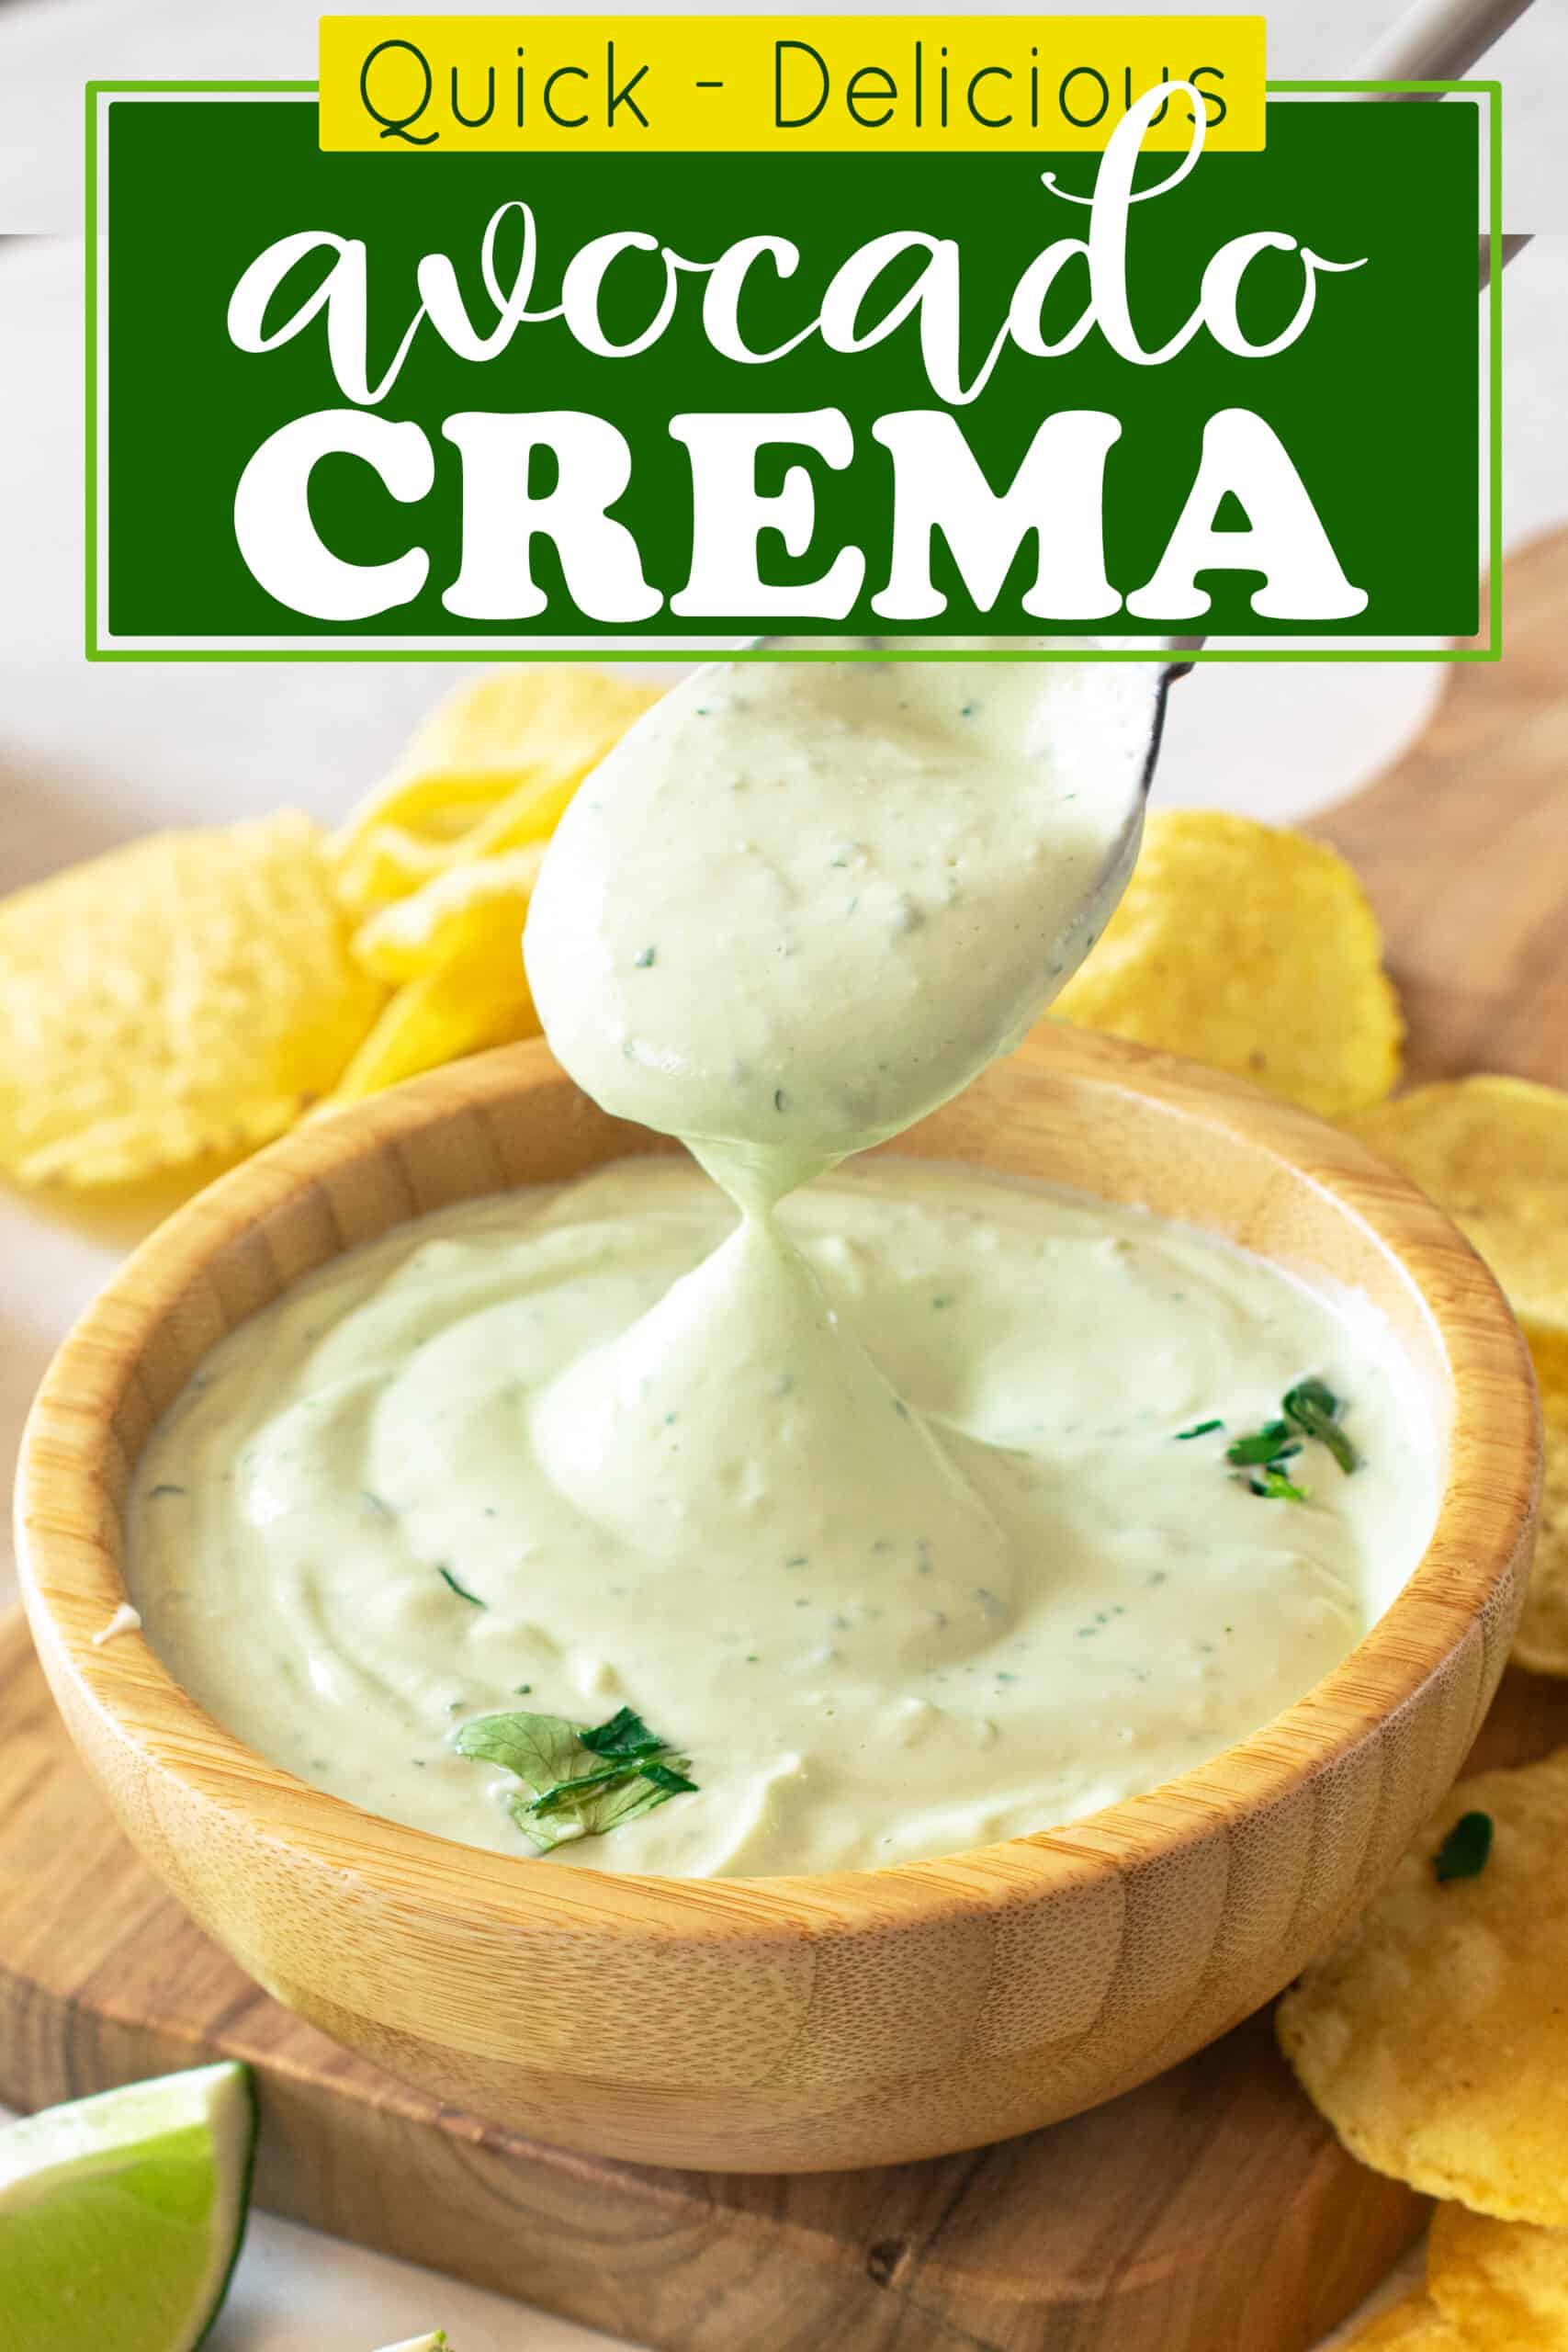 Avocado Crema in a bowl with spoon dipping into and tortilla chips sprinkled around.